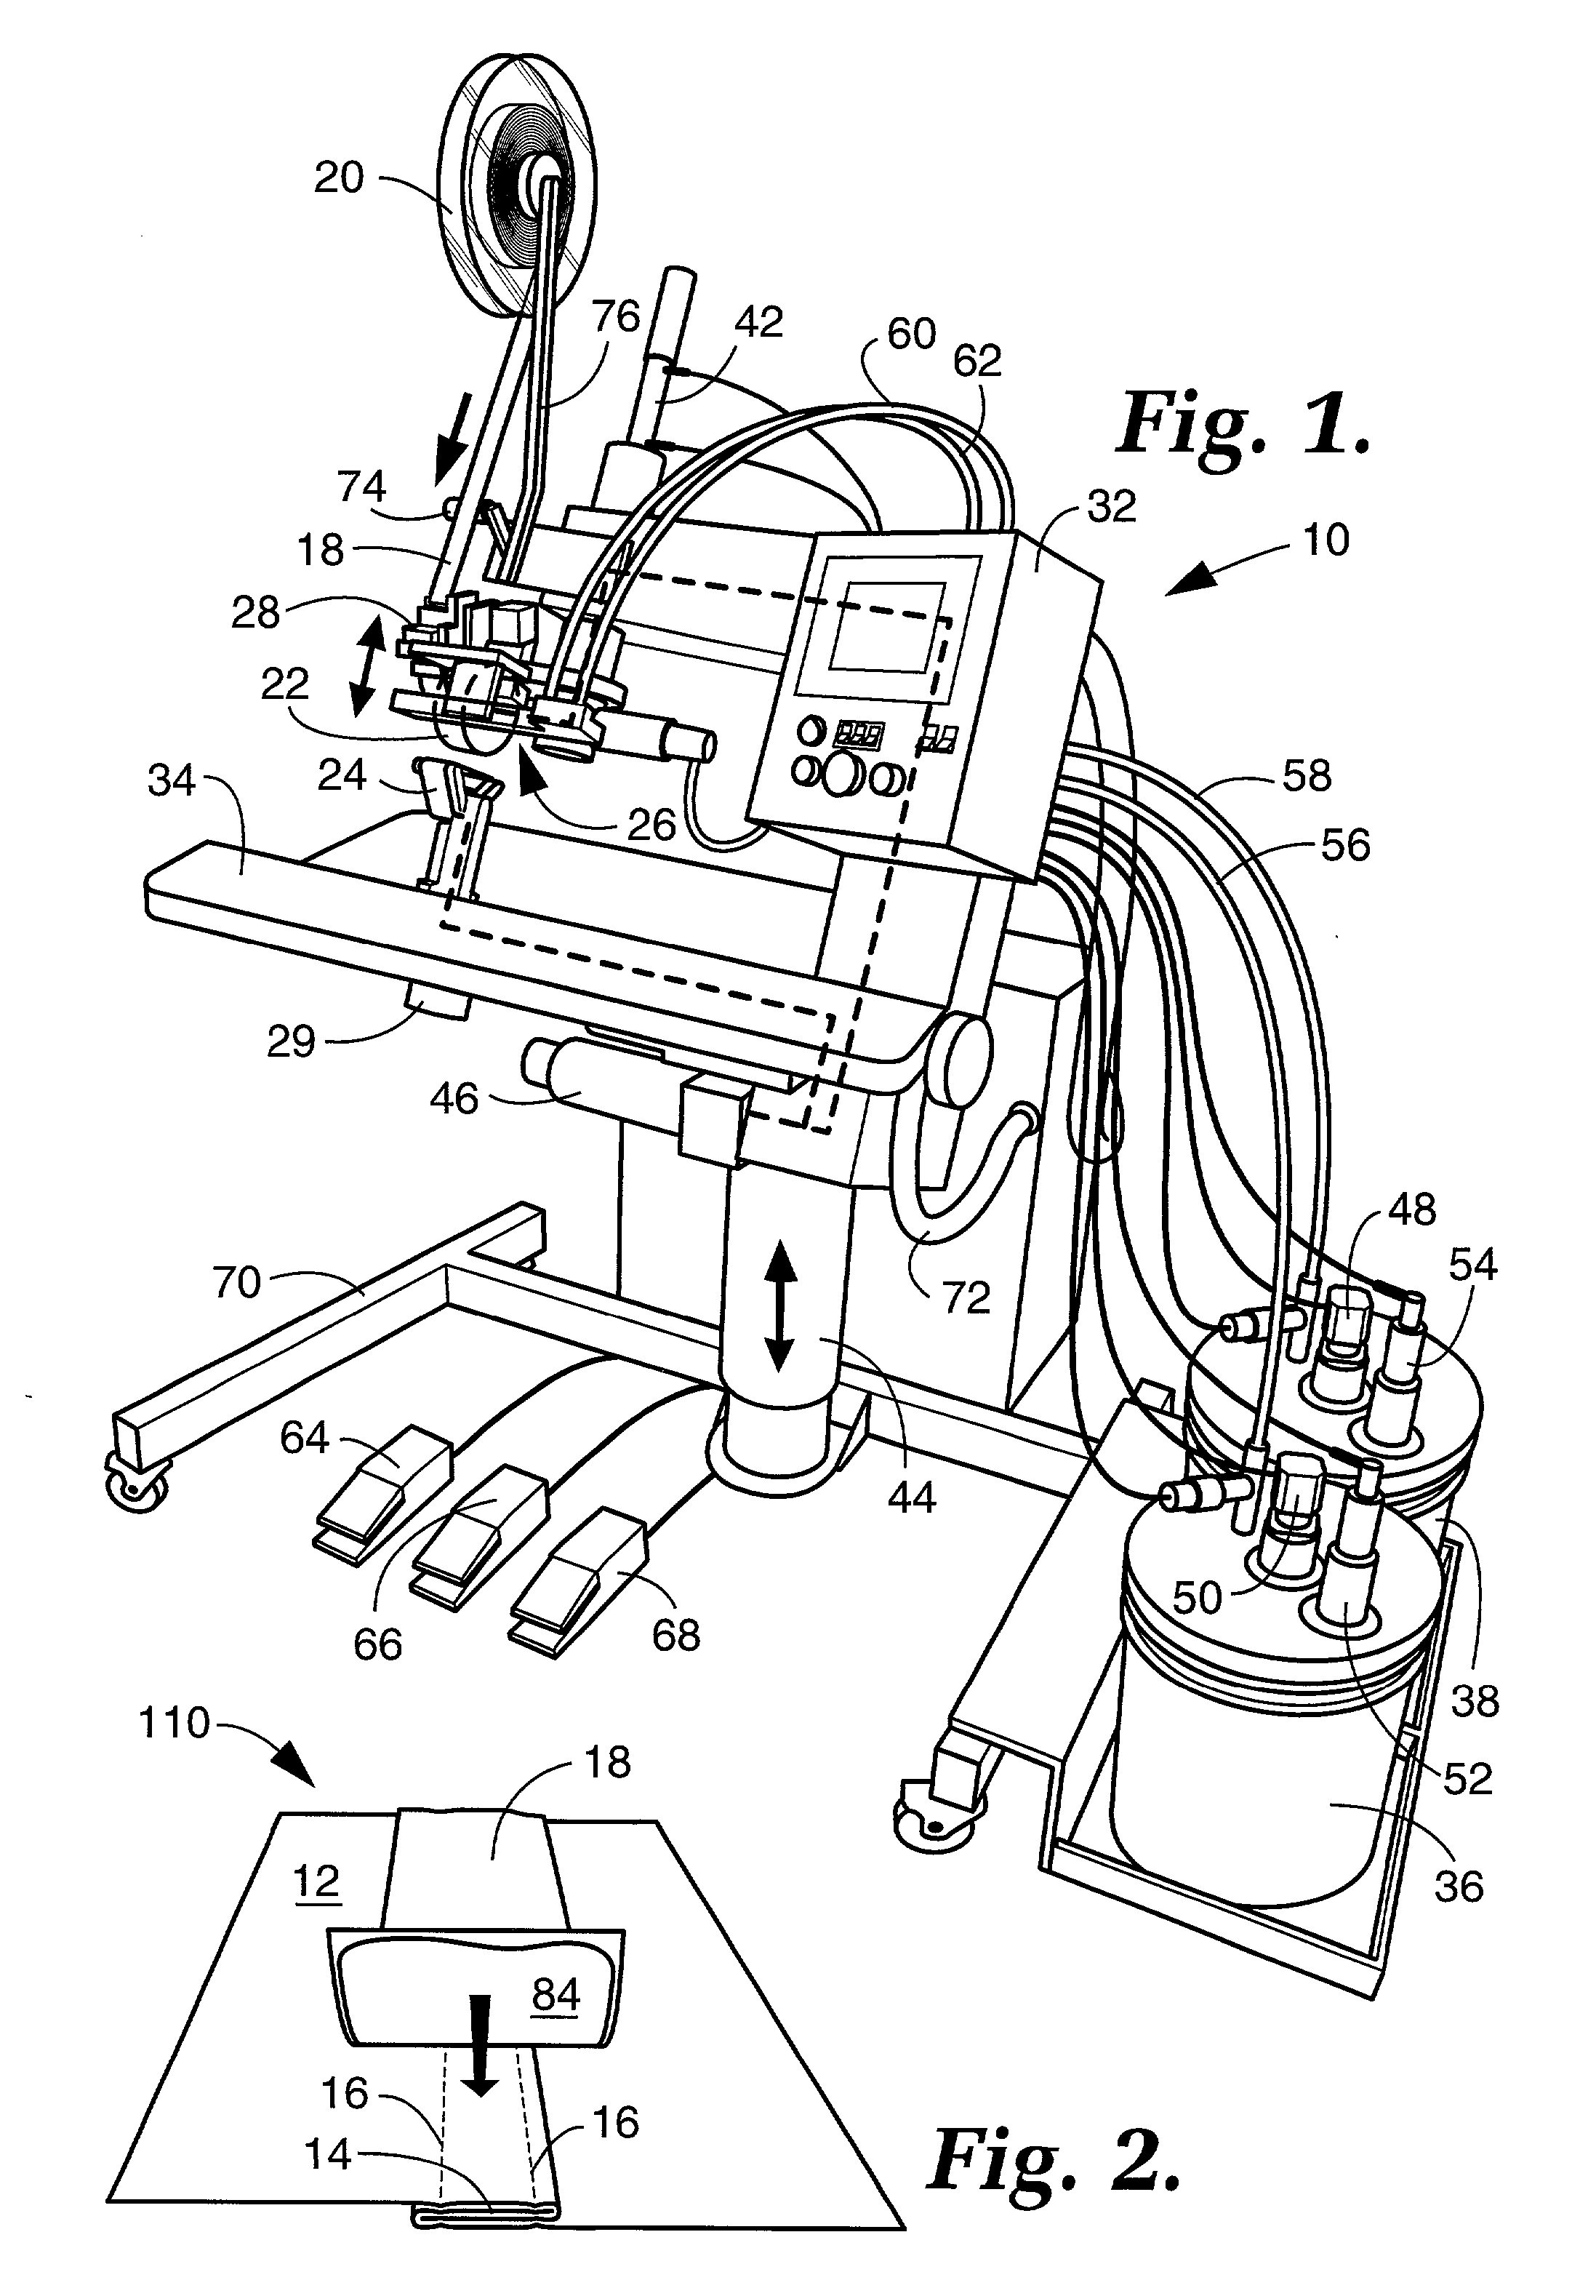 Seam sealing apparatus and process therefor